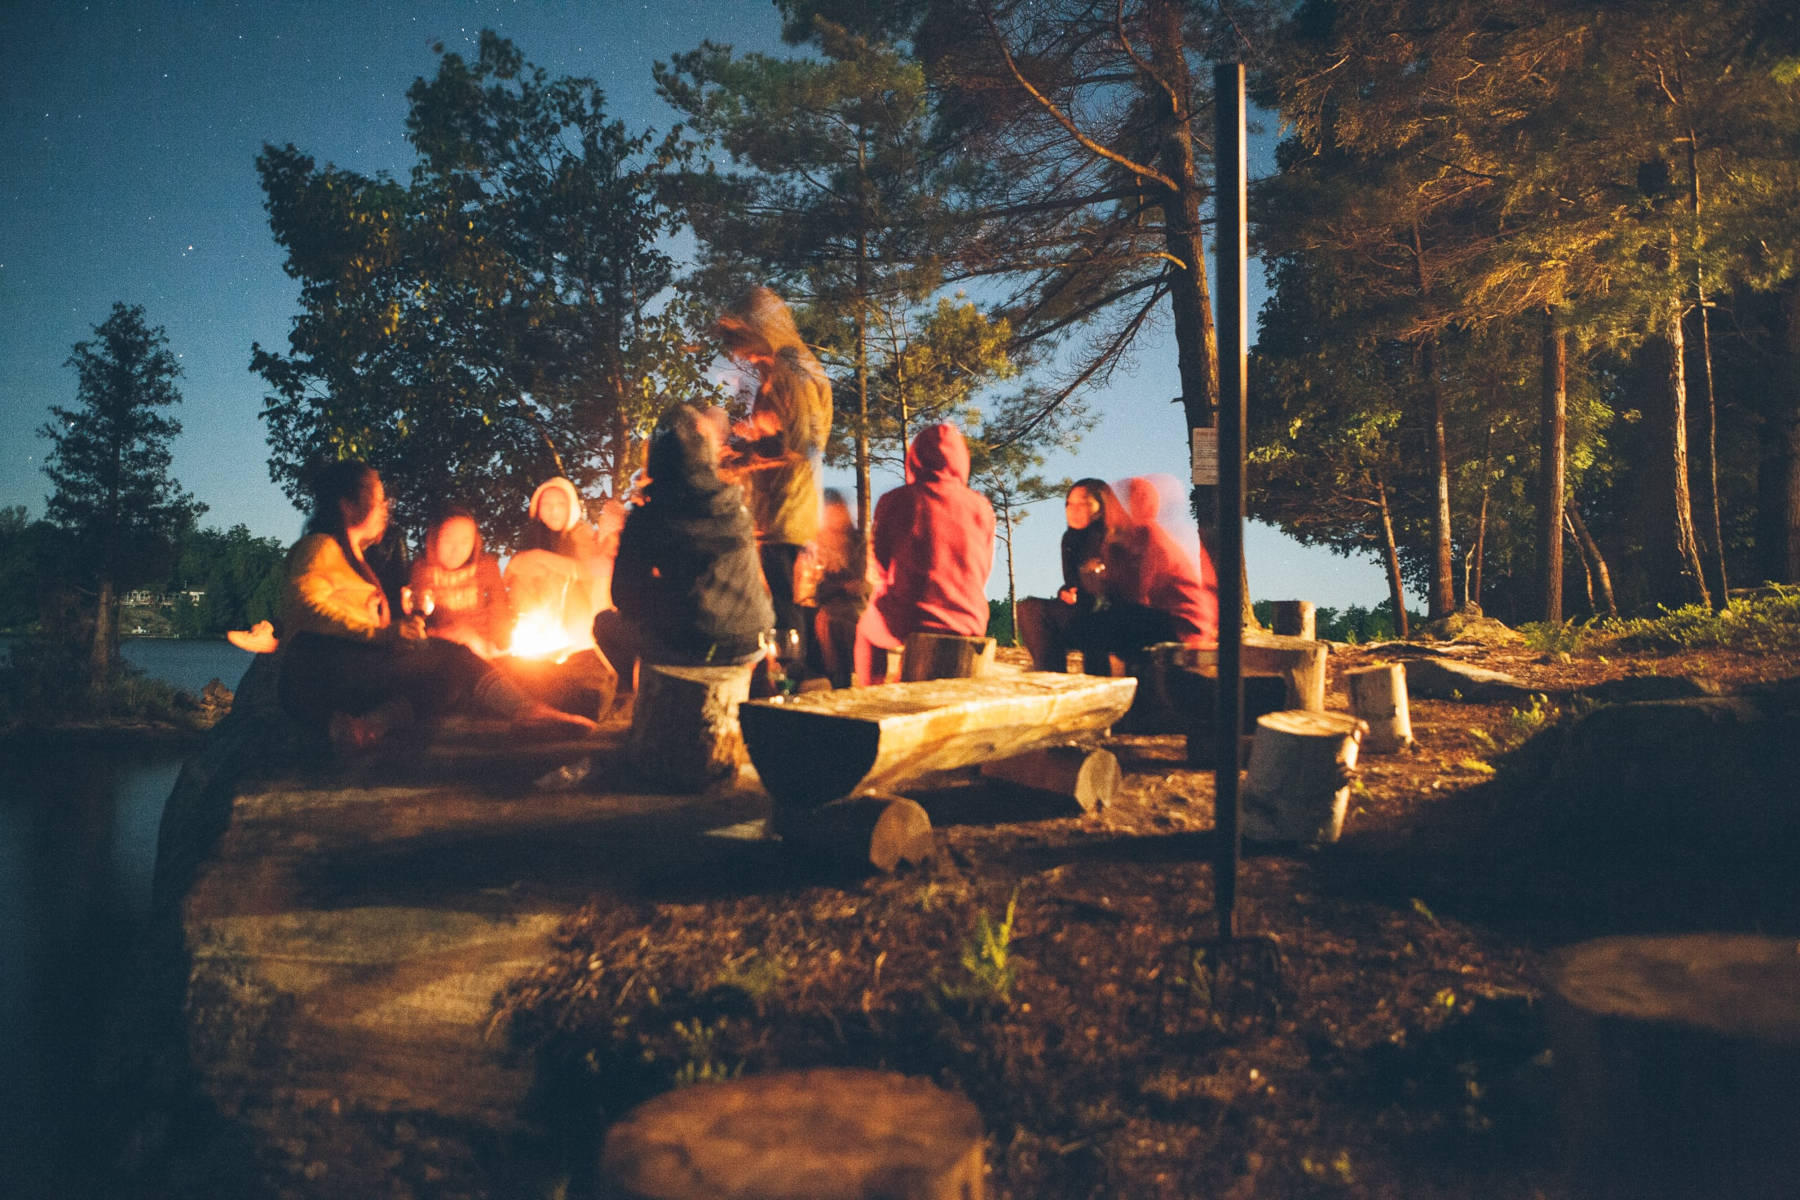 Friends sitting around a campfire at night - HelloTrail.com